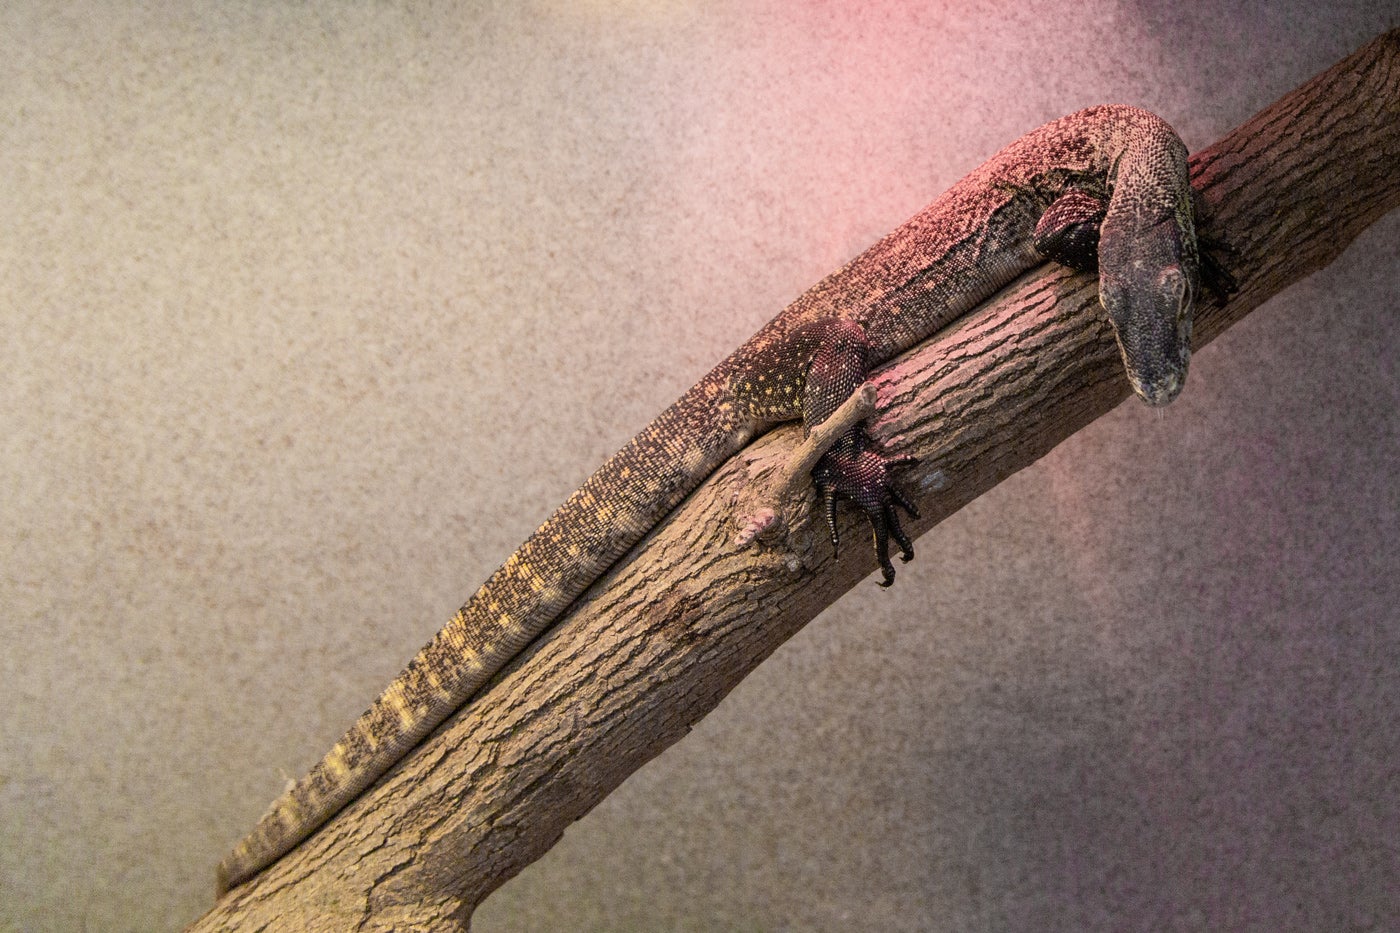  A young Komodo dragon (monitor lizard) with a long, slender body resting on a tree branch